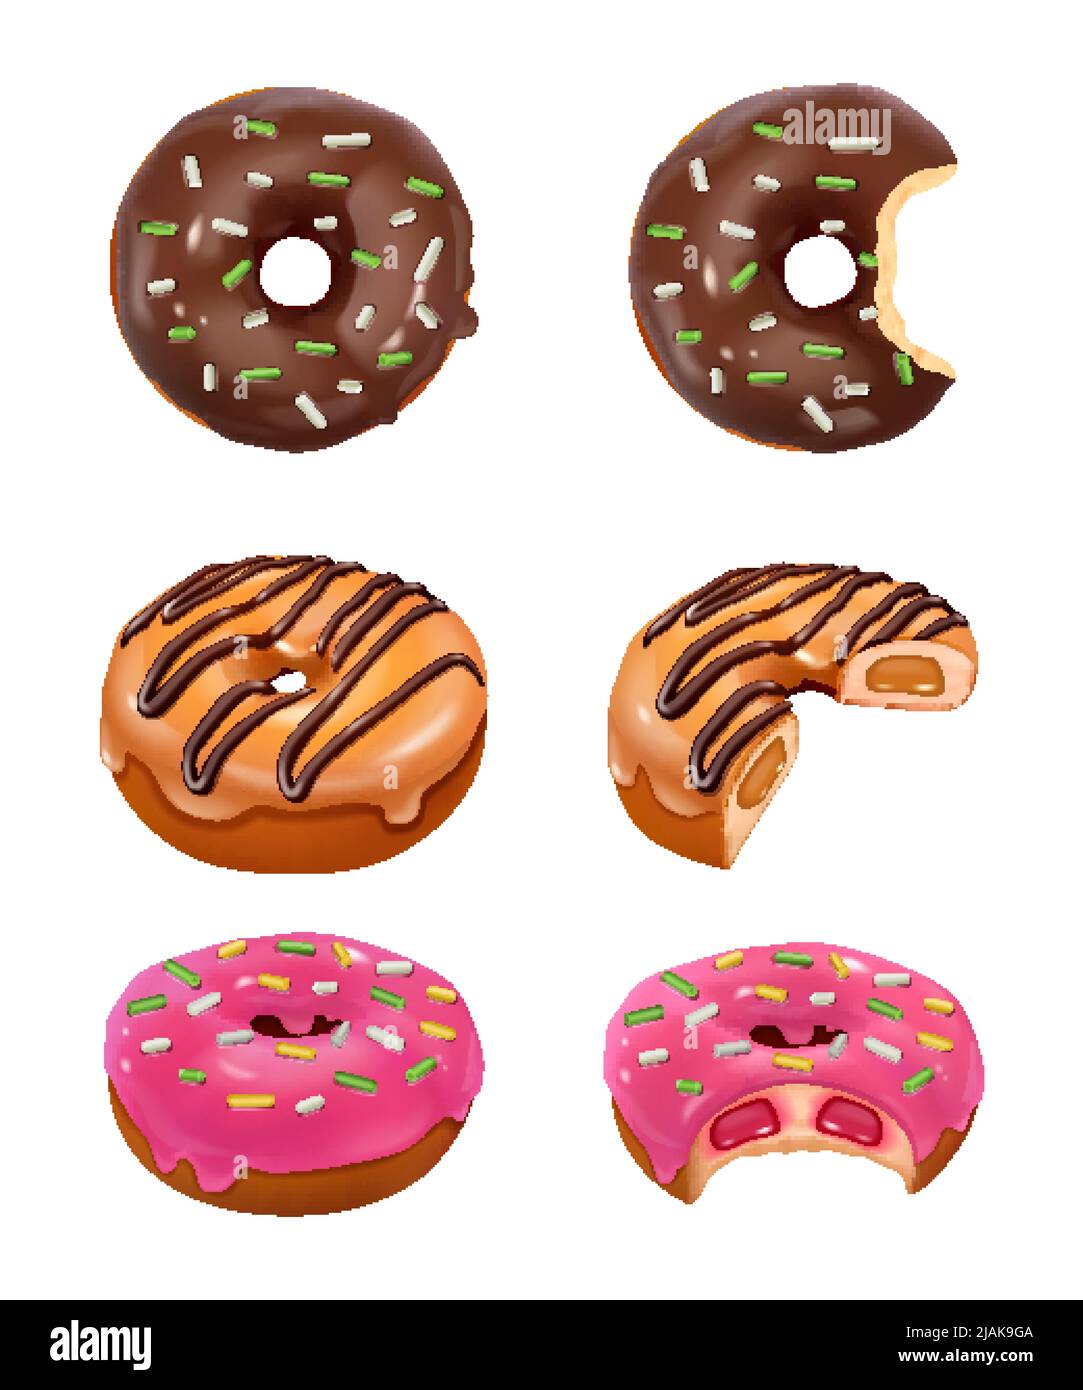 Whole and bitten off donuts realistic set with chocolate and pink glaze and colored sprinkles isolated vector illustration Stock Vector